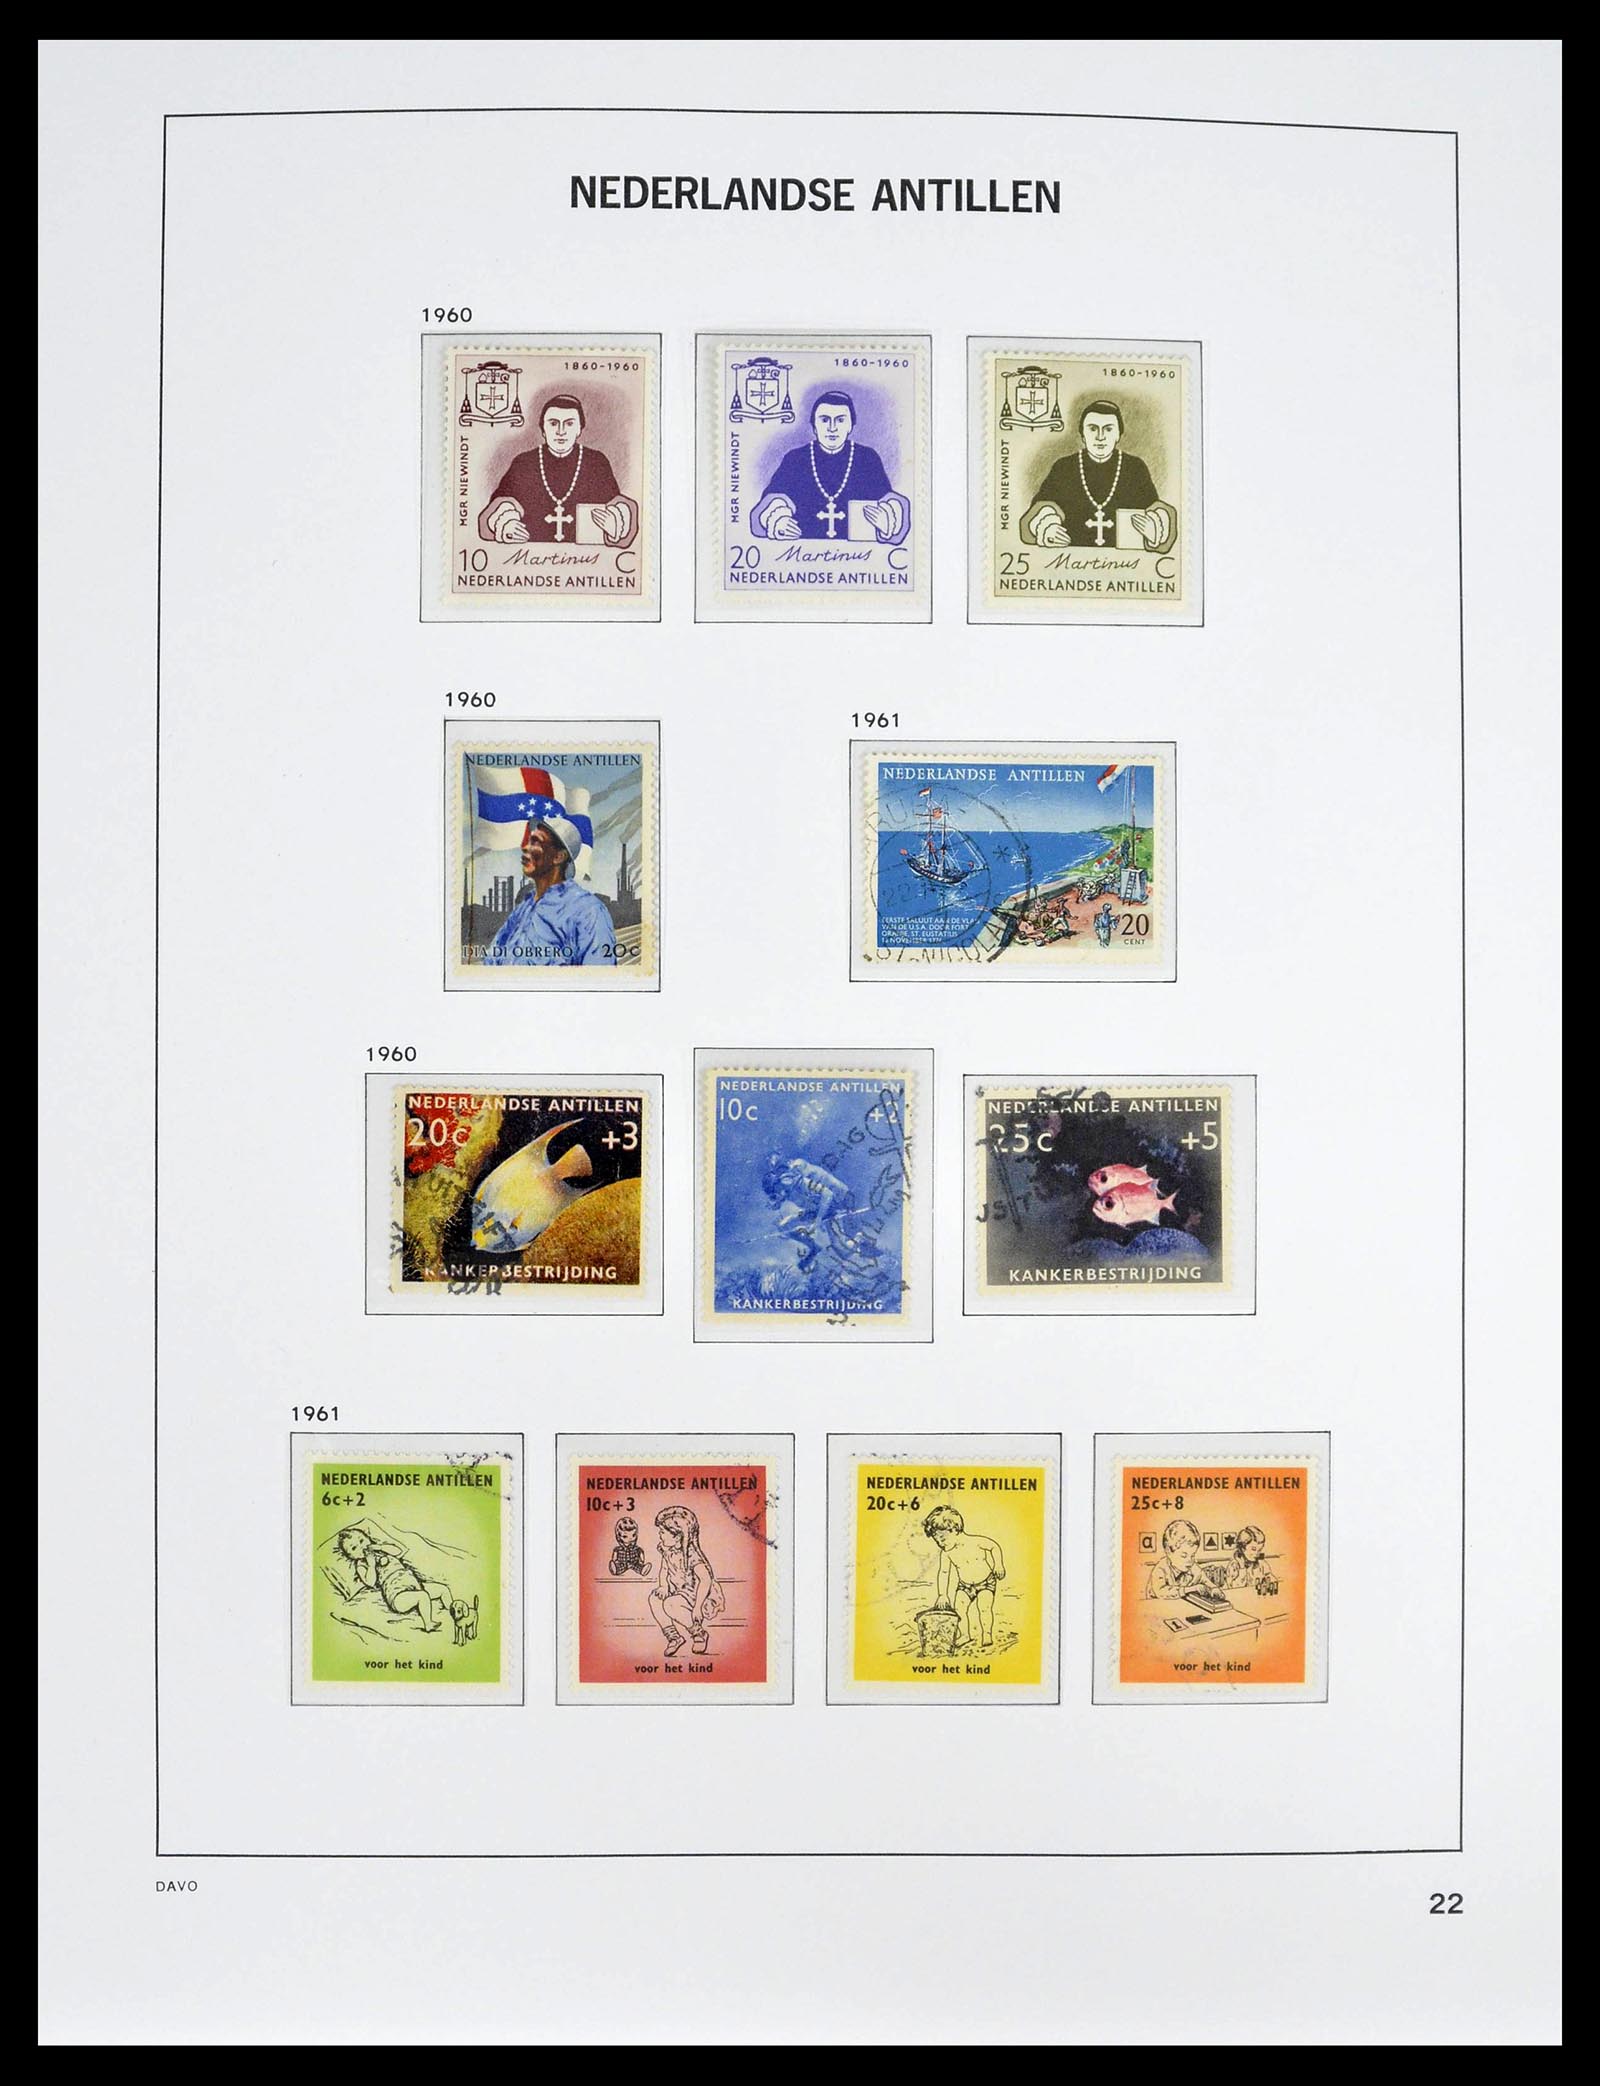 39360 0022 - Stamp collection 39360 Curaçao/Antilles complete 1873-2013.